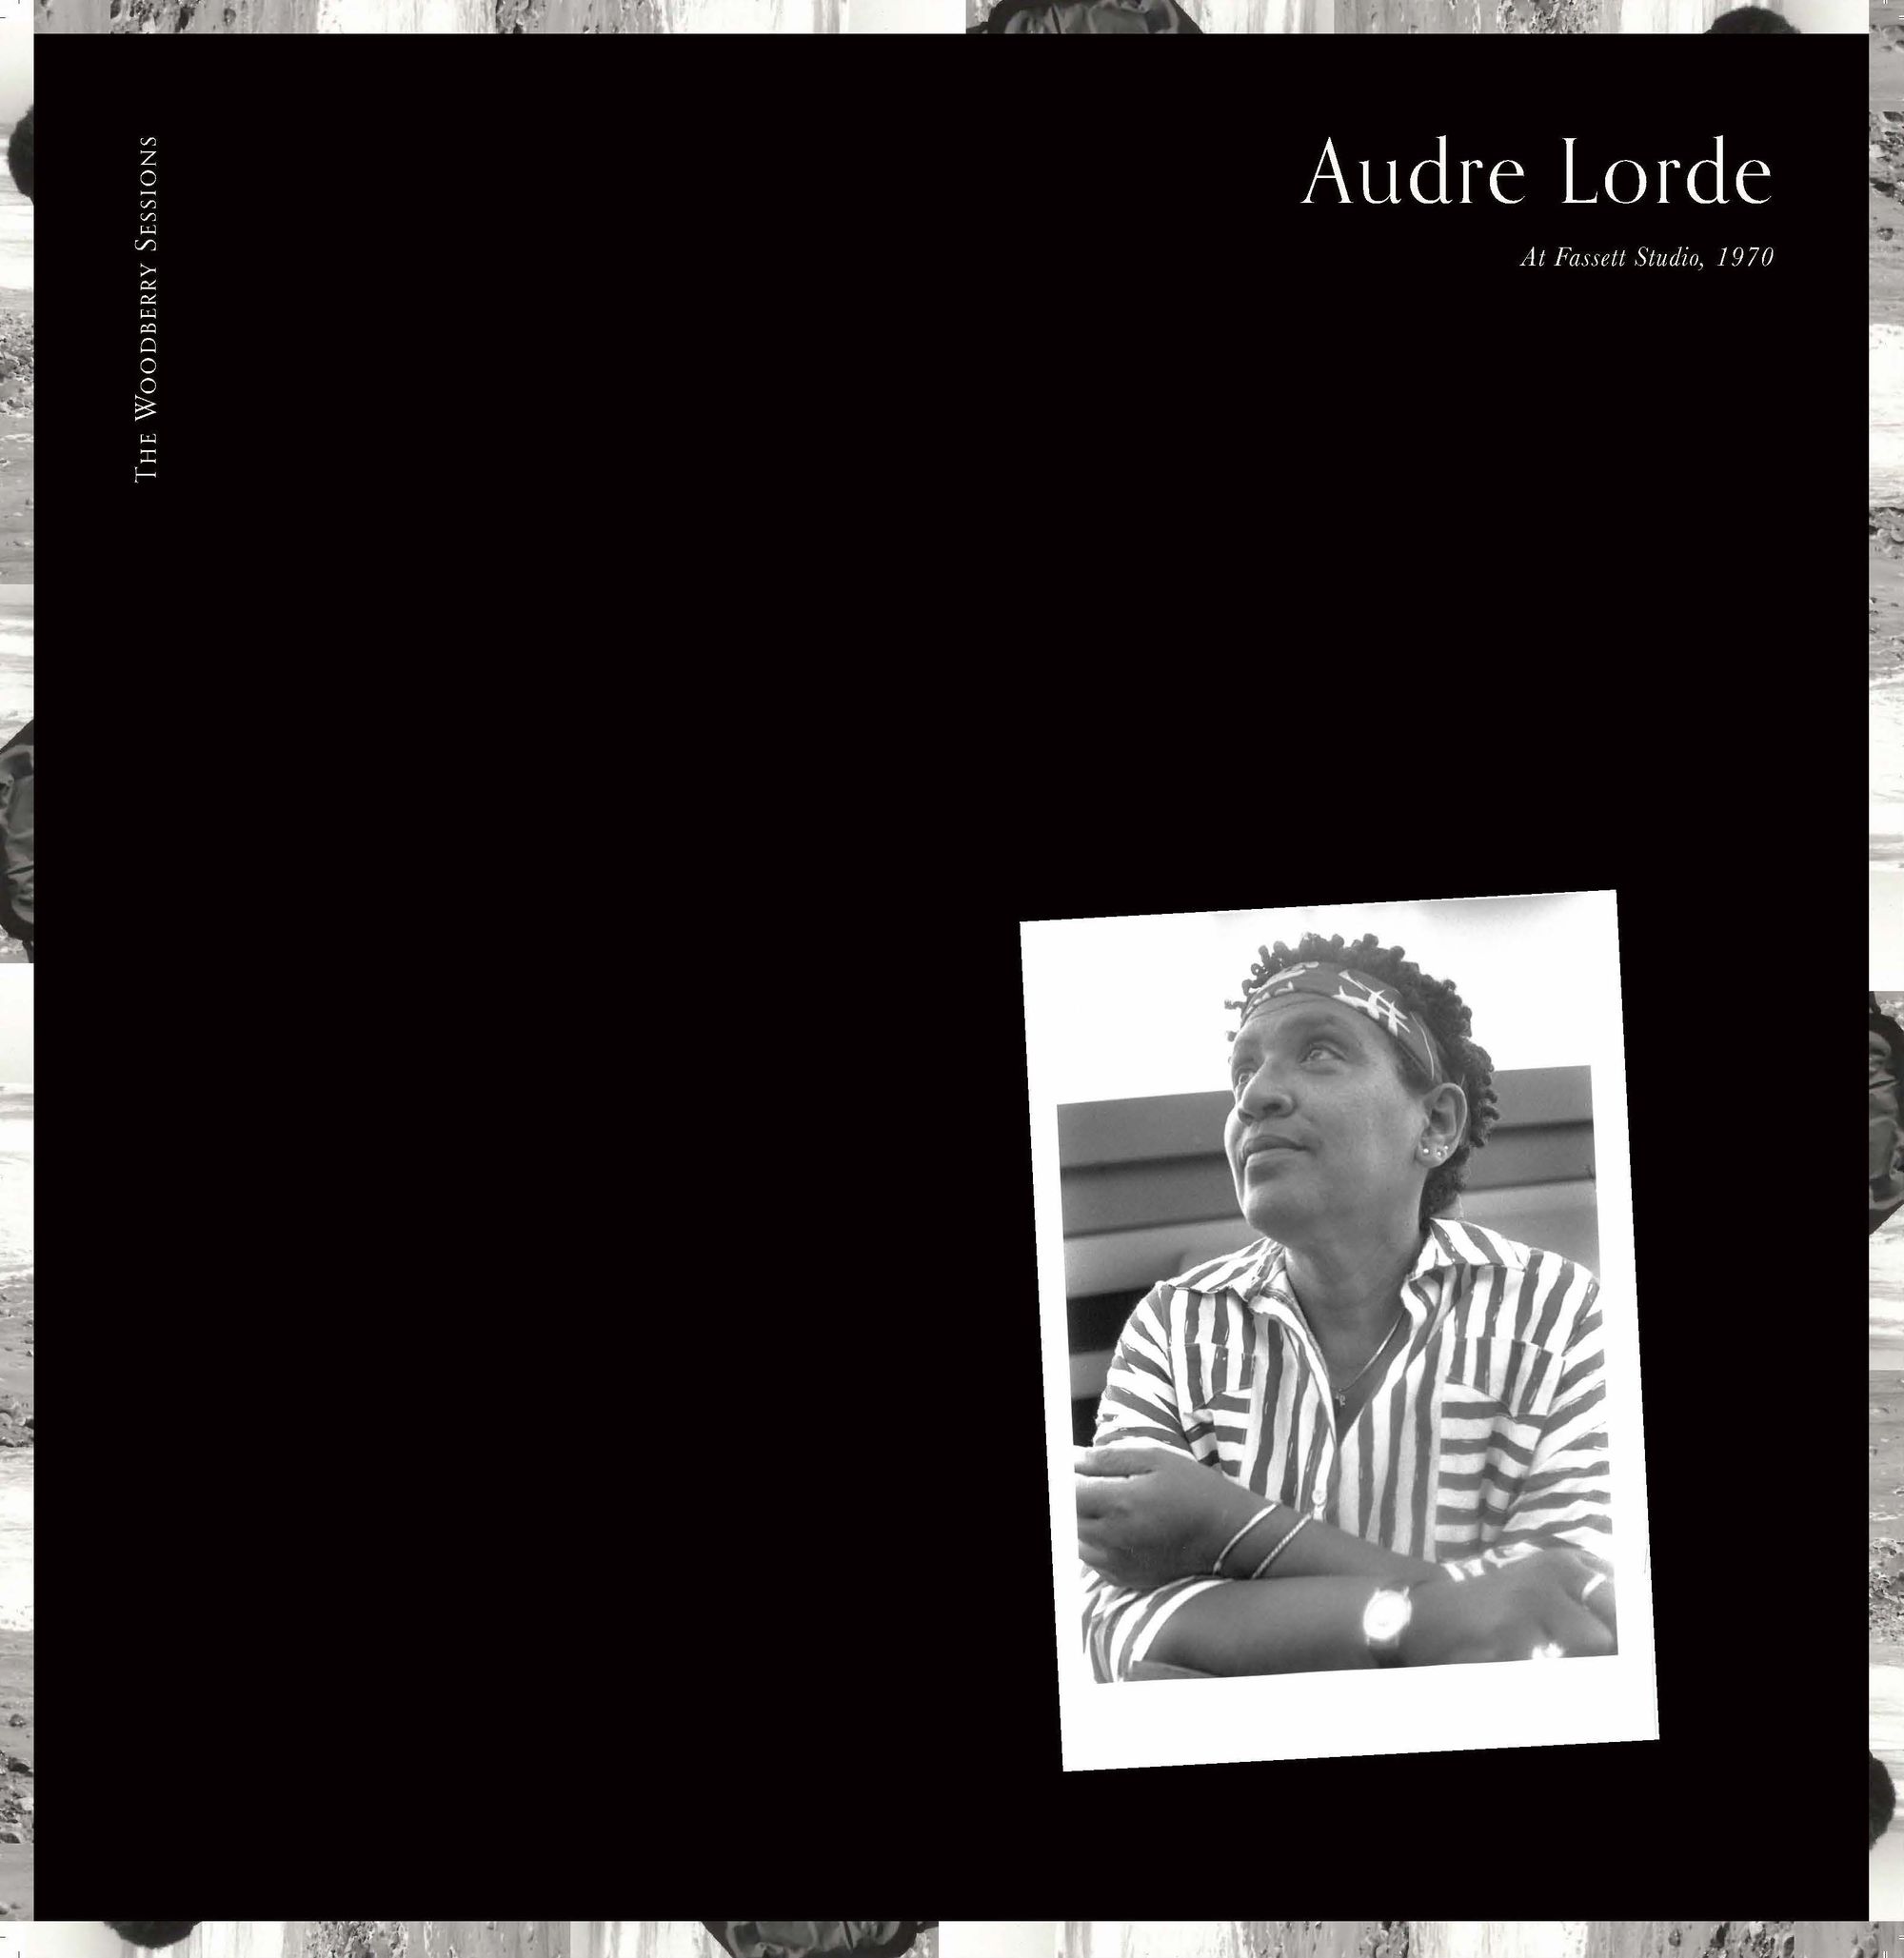 A black LP cover with a small black and white photo of Lorde